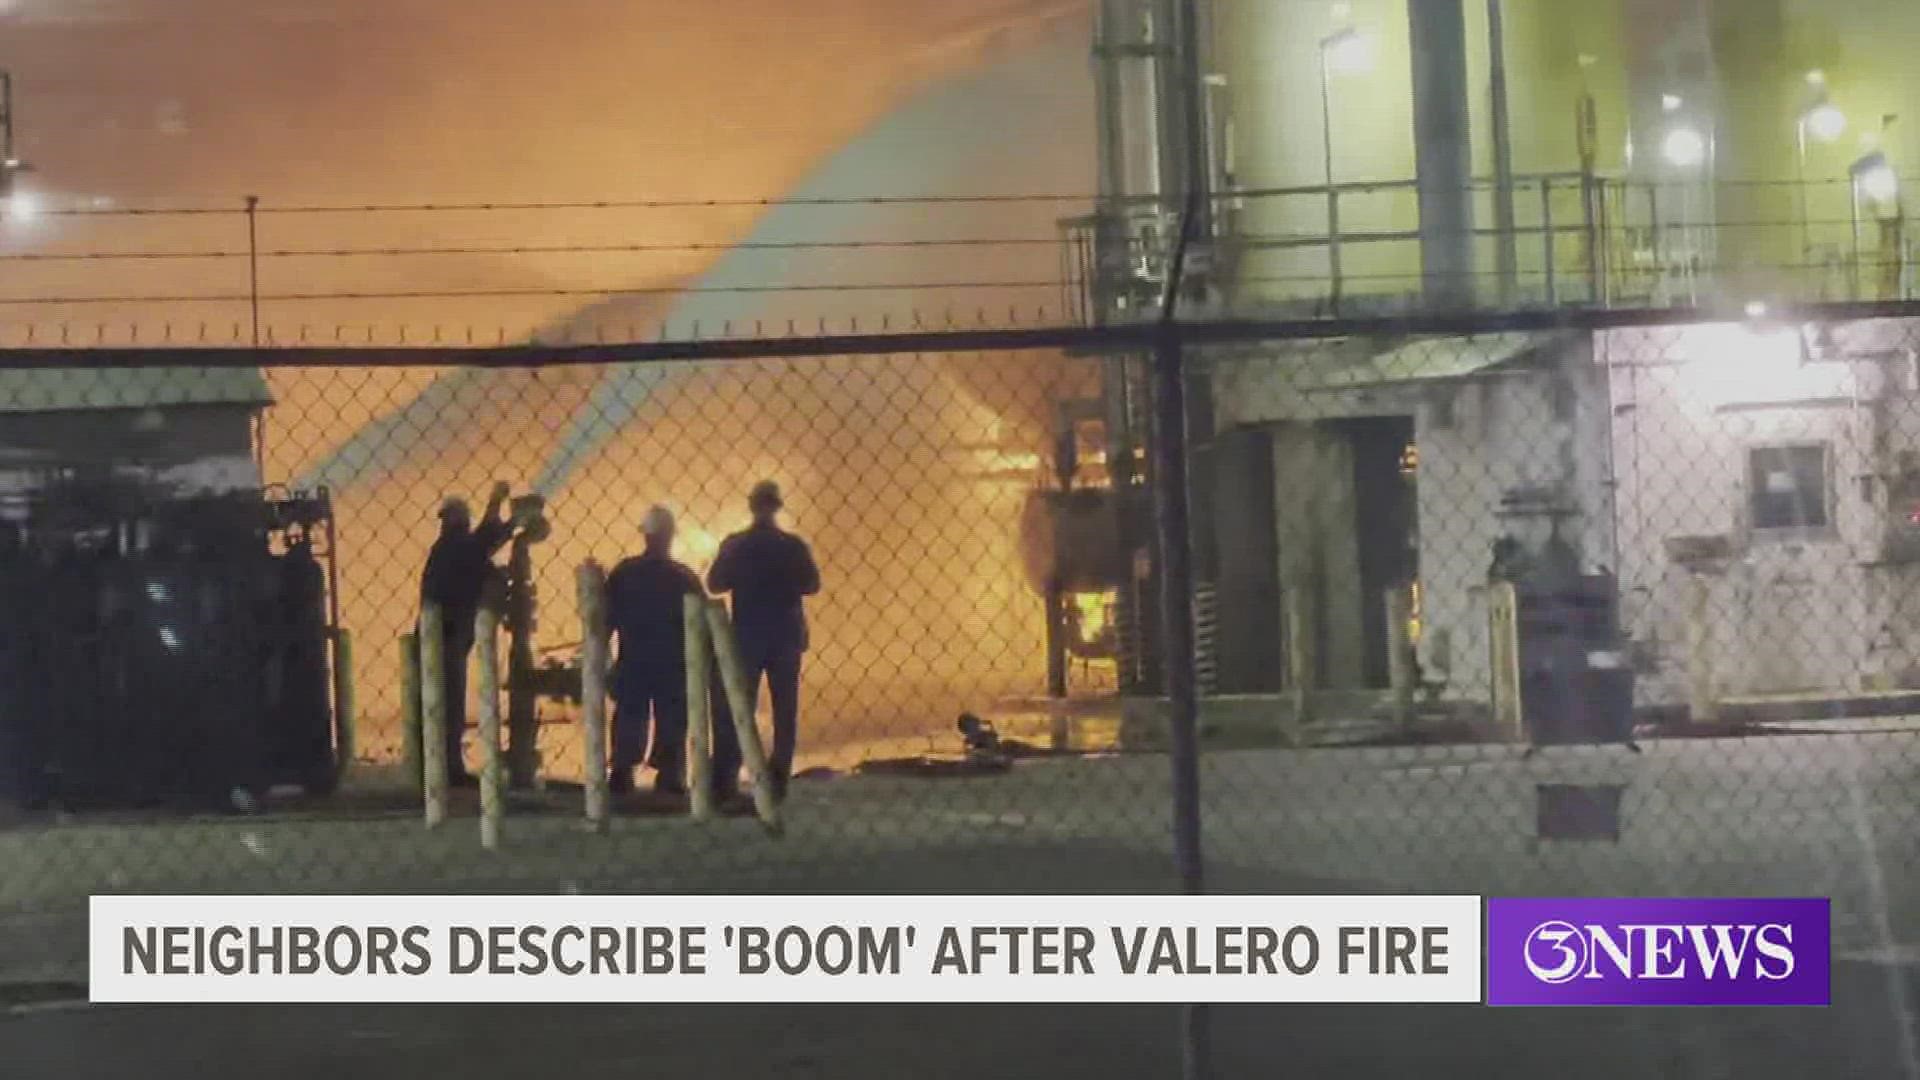 A Reverse Alert, sent around 7:10 a.m., said units are responding to a "localized fire at the Valero East Plant."